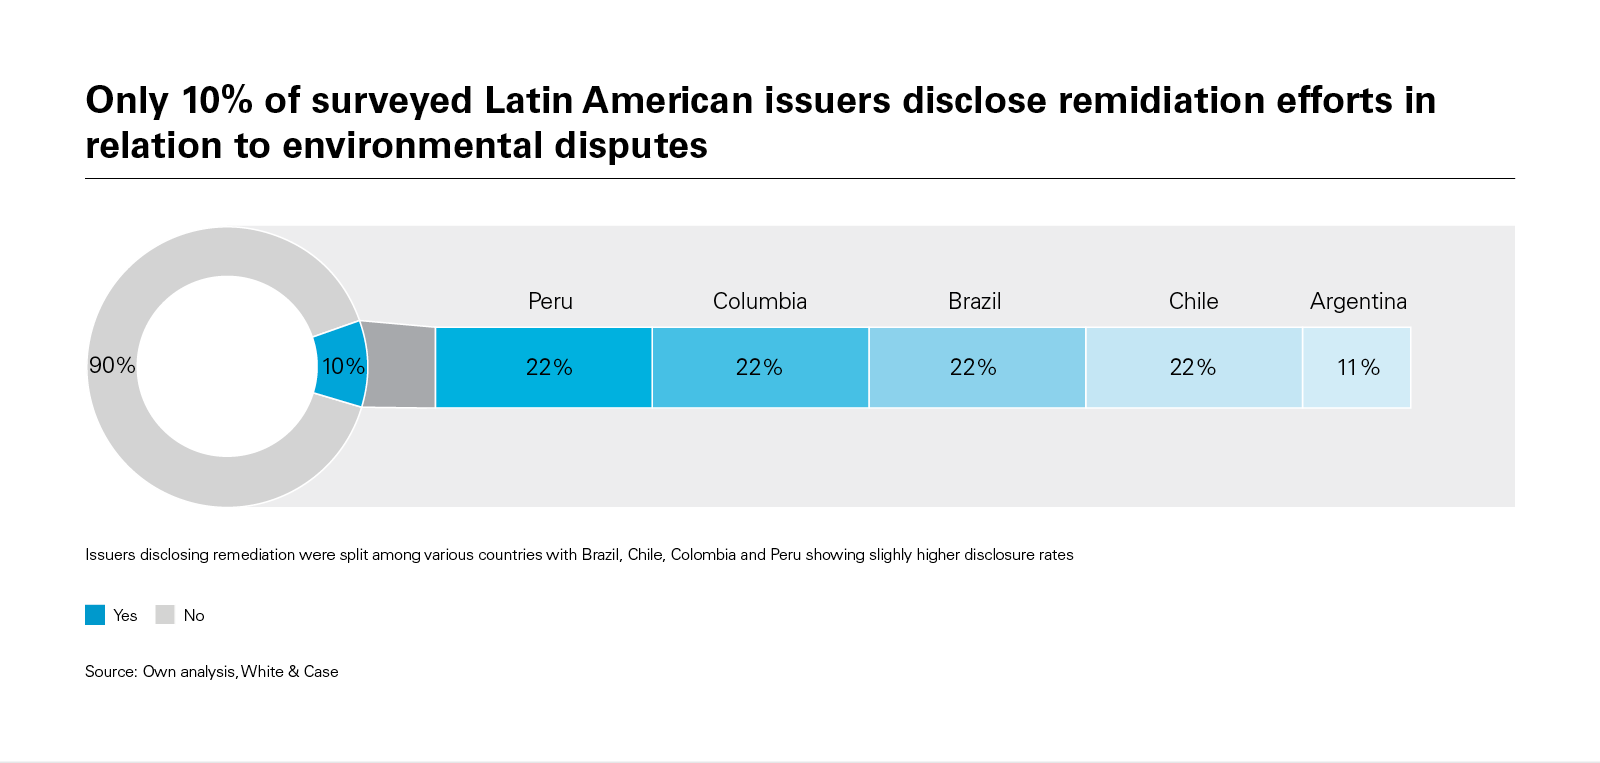 Only 10% of surveyed Latin American issuers disclose remidiation efforts in relation to environmental disputes